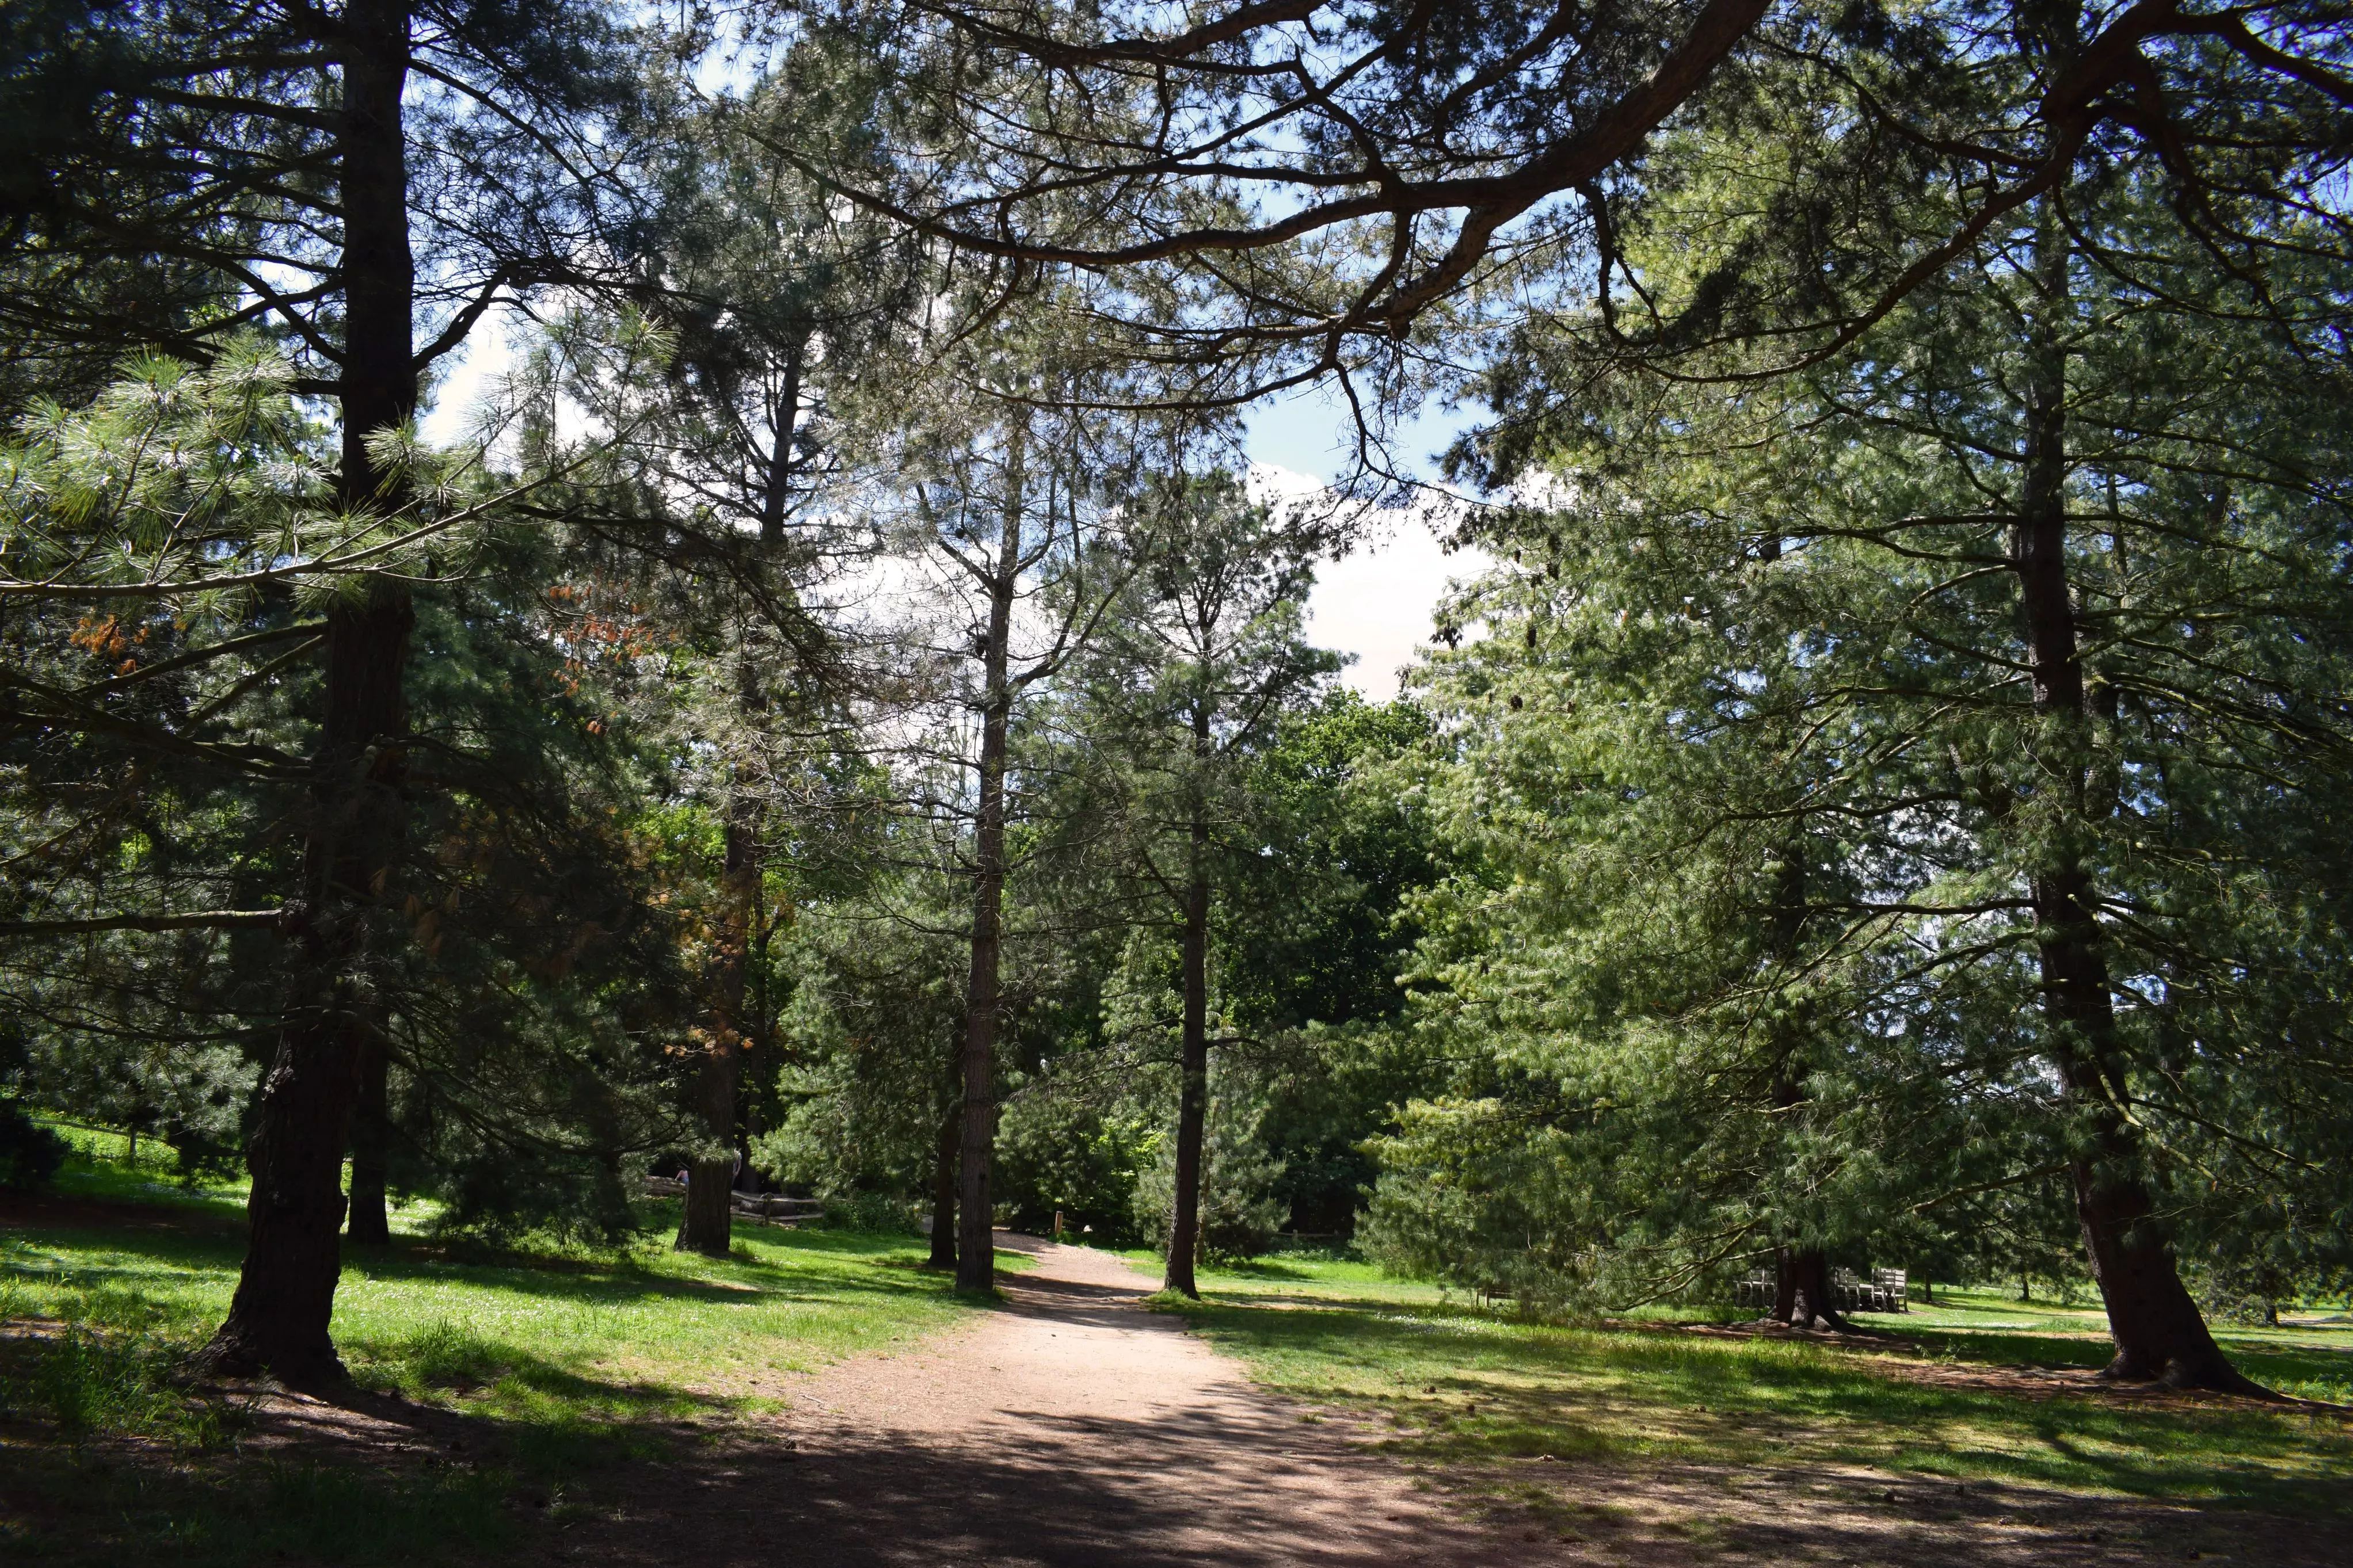 Several conifer trees within the Pinetum of Kew Gardens